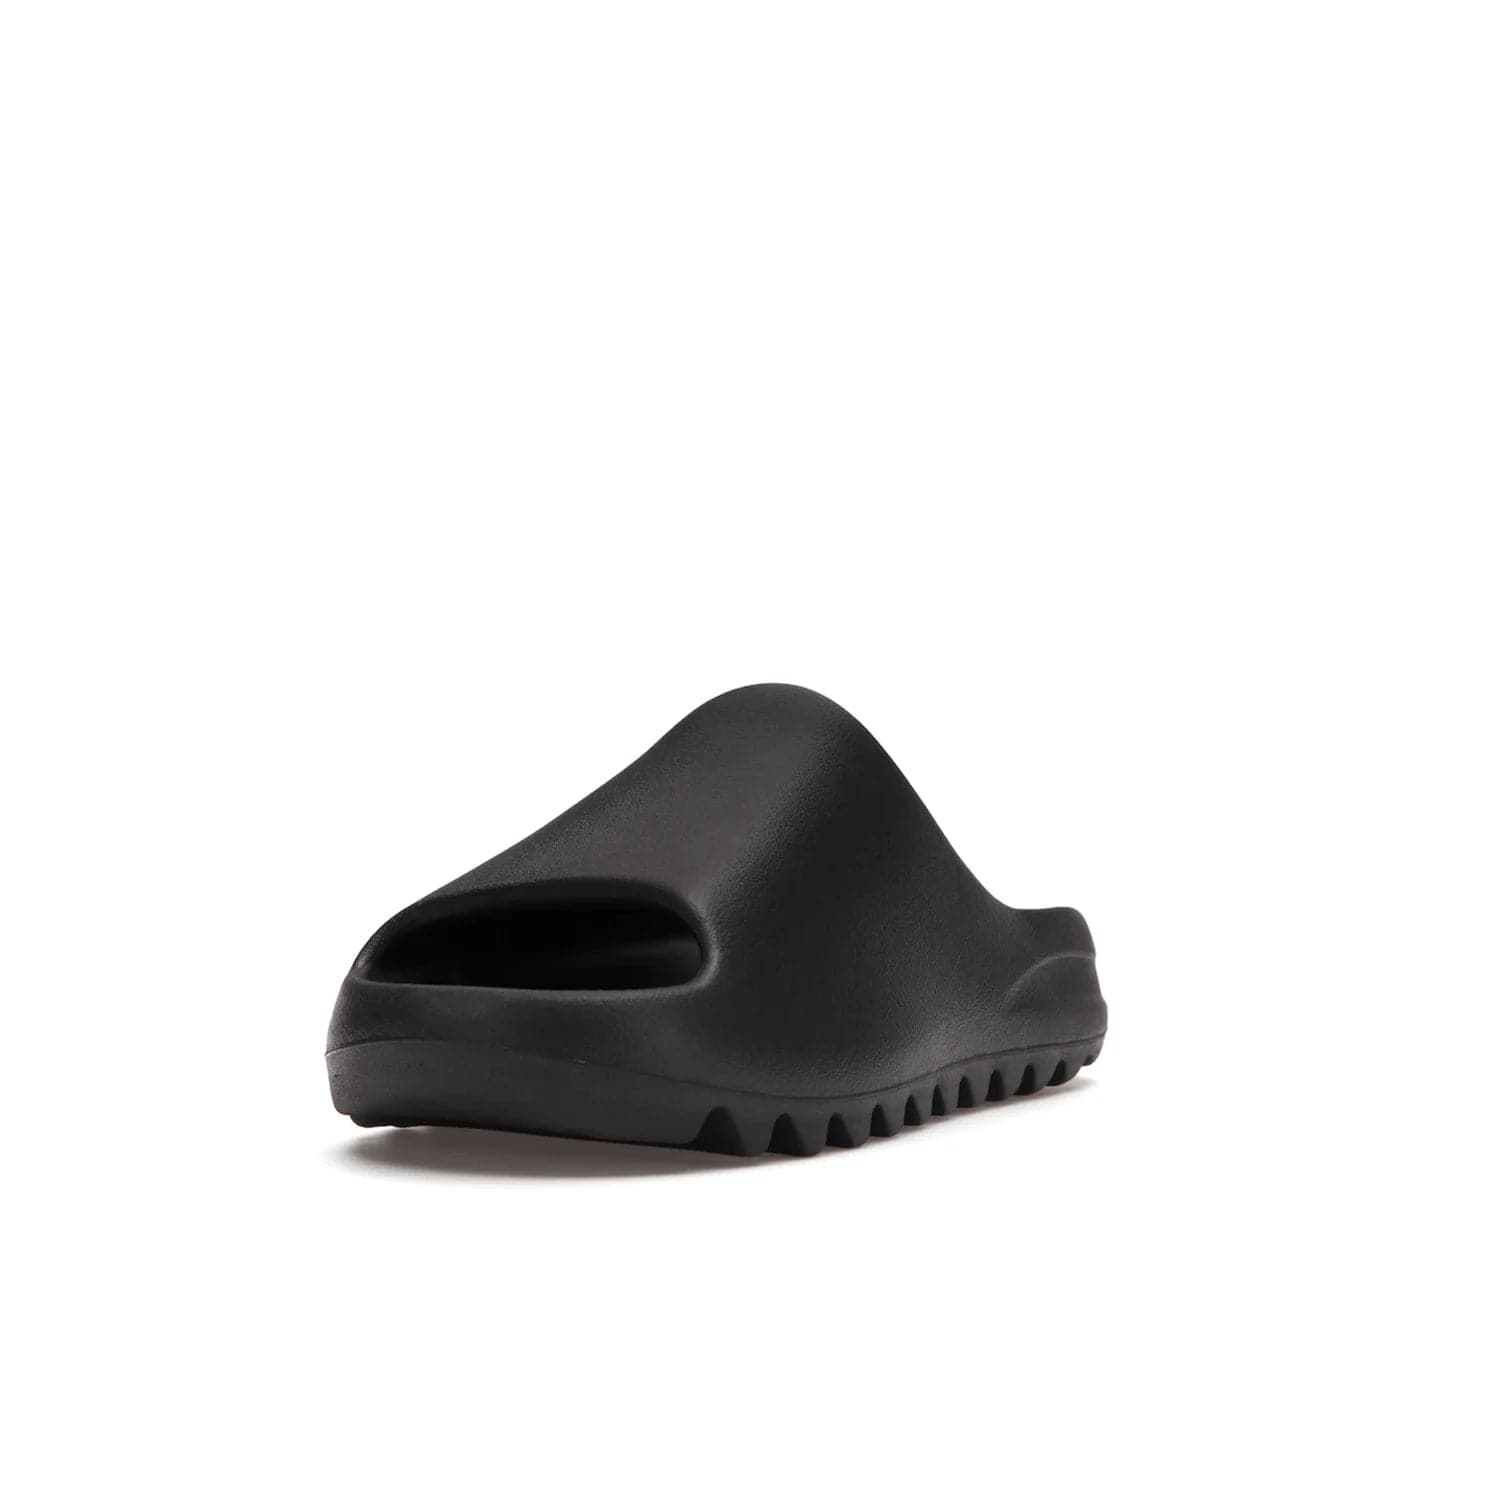 adidas Yeezy Slide Onyx - Image 13 - Only at www.BallersClubKickz.com - Step into comfort and style with the adidas Yeezy Slide Onyx. Featuring foam construction, an all-black colorway and a grooved outsole for stability and responsiveness, this versatile slide is a must-have for your collection.